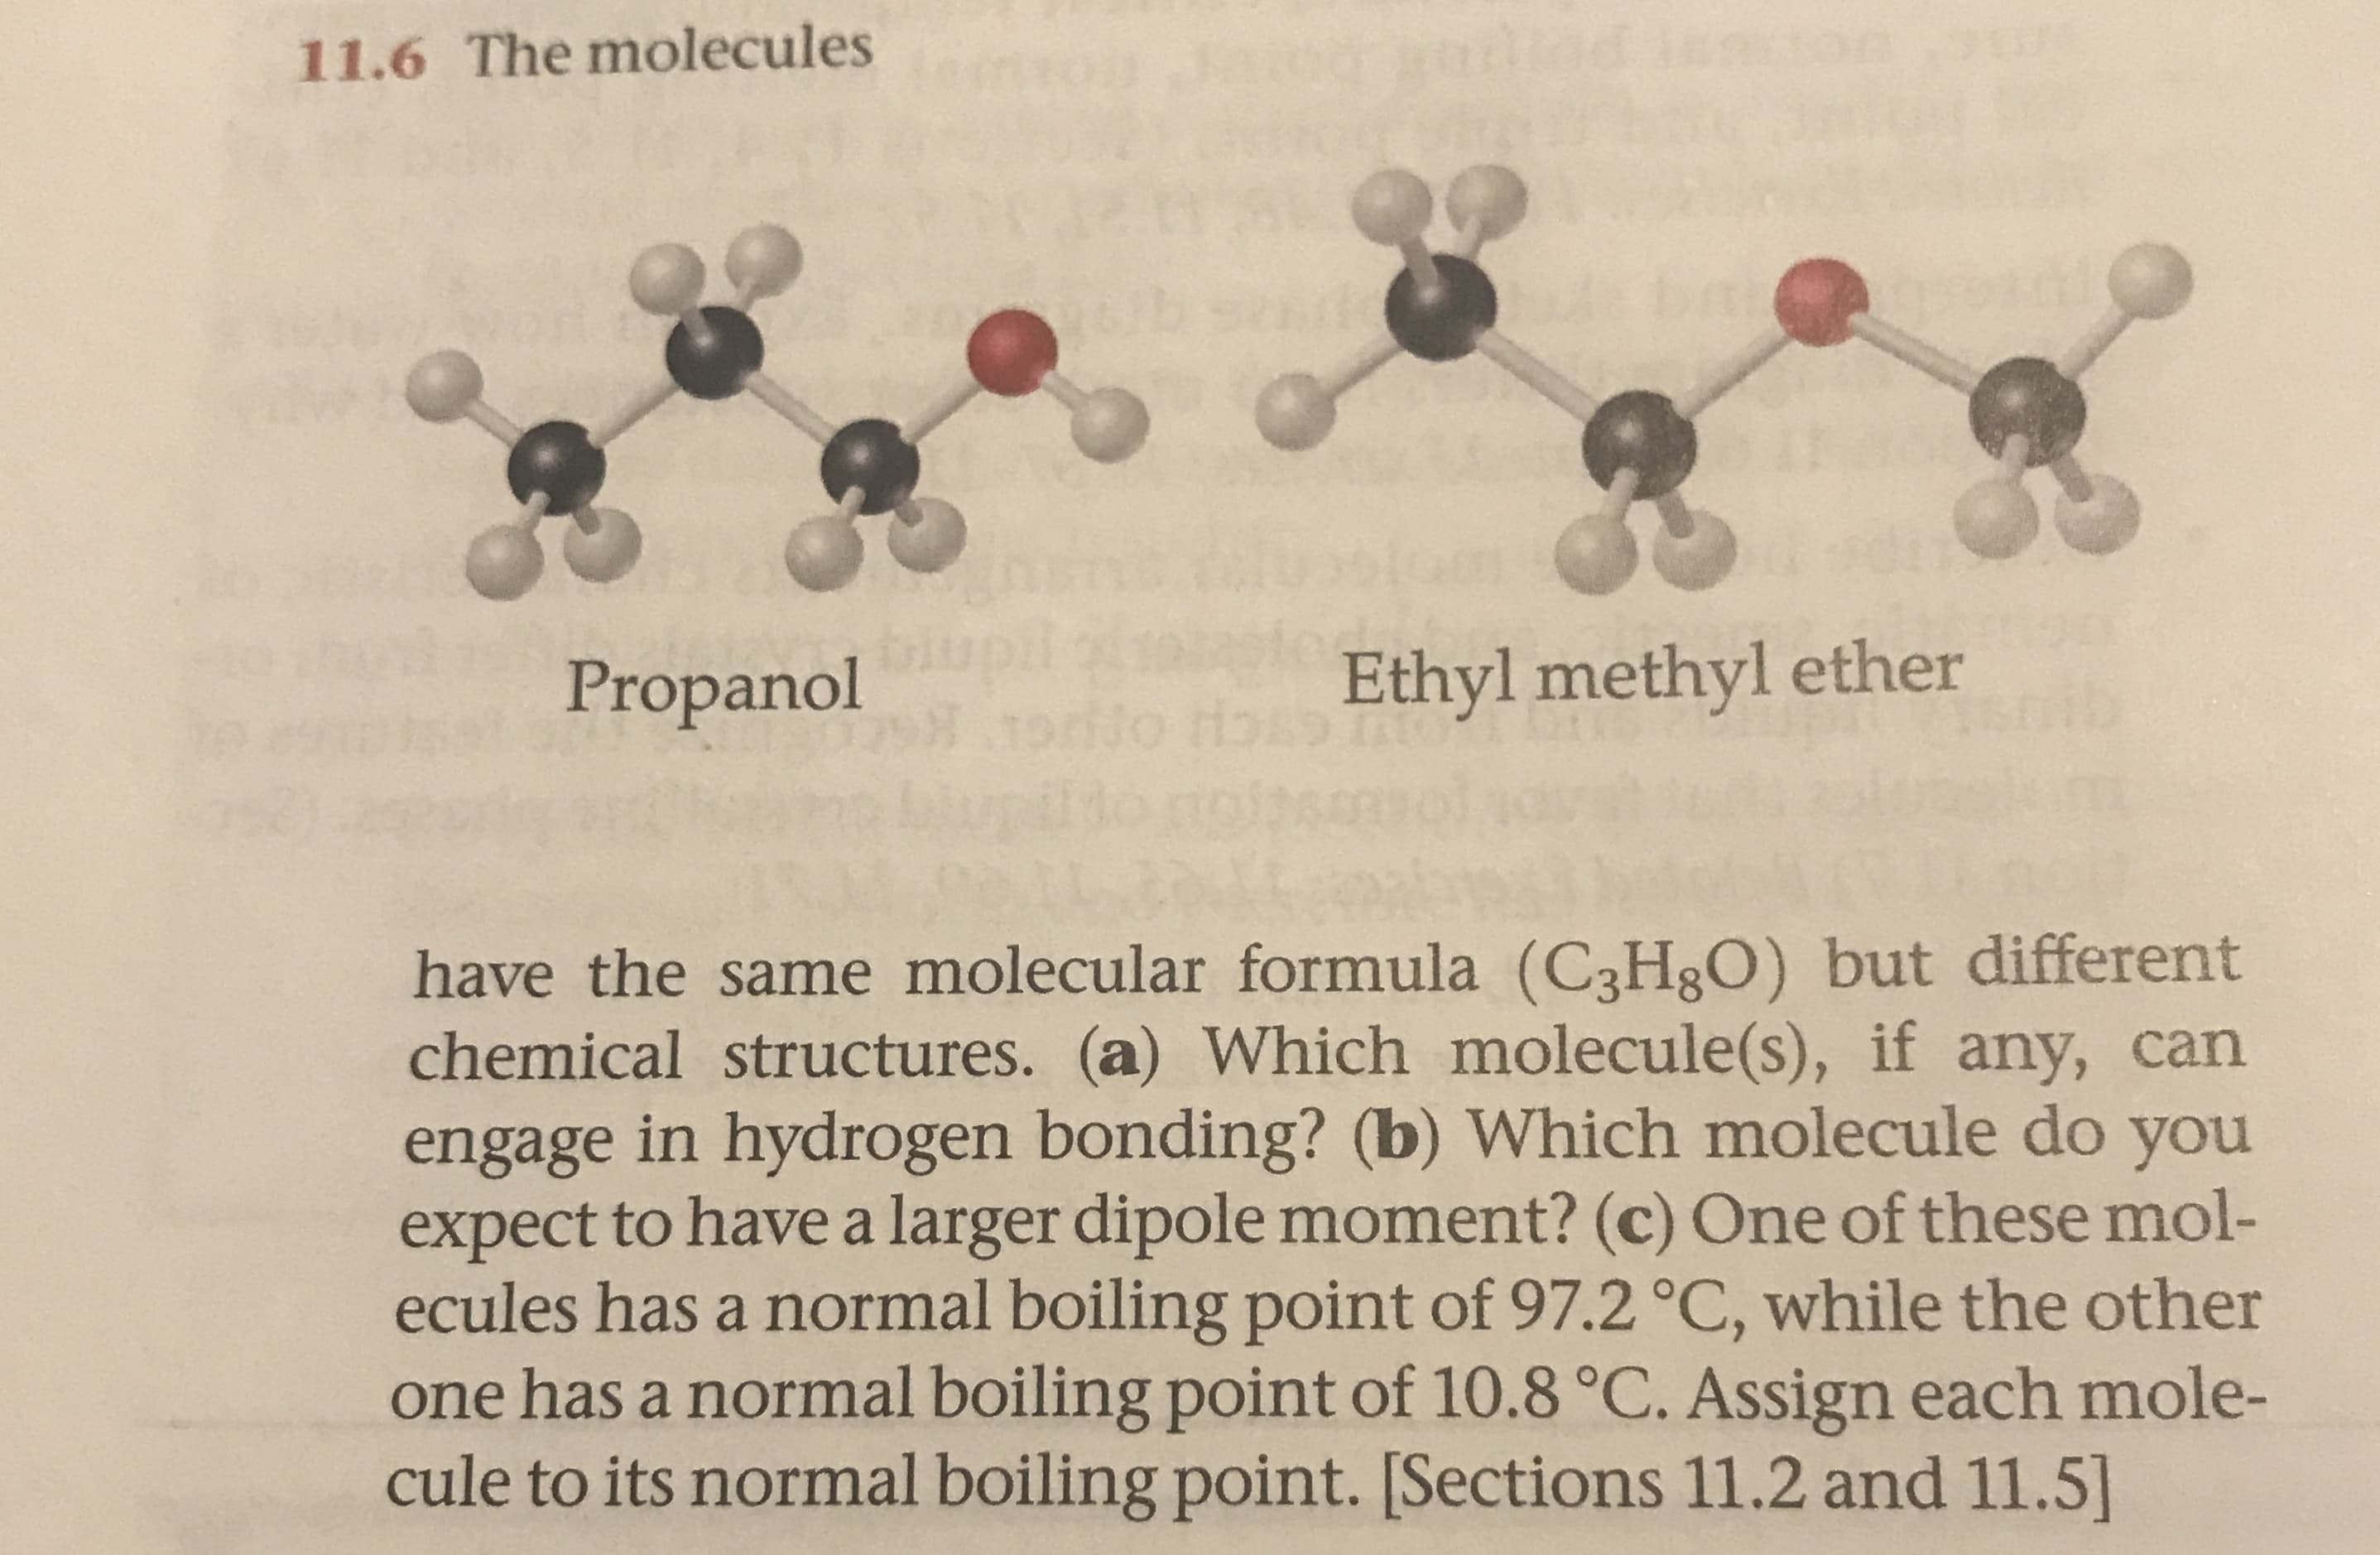 11.6 The molecules
Ethyl methyl ether
Propanol
have the same molecular formula (C3H8O) but different
chemical structures. (a) Which molecule (s), if any, can
engage in hydrogen bonding? (b) Which molecule do you
expect to have a larger dipole moment? (c) One of these mol-
ecules has a normal boiling point of 97.2 °C, while the other
one has a normal boiling point of 10.8 °C. Assign each mole-
cule to its normal boiling point. [Sections 11.2 and 11.5]
